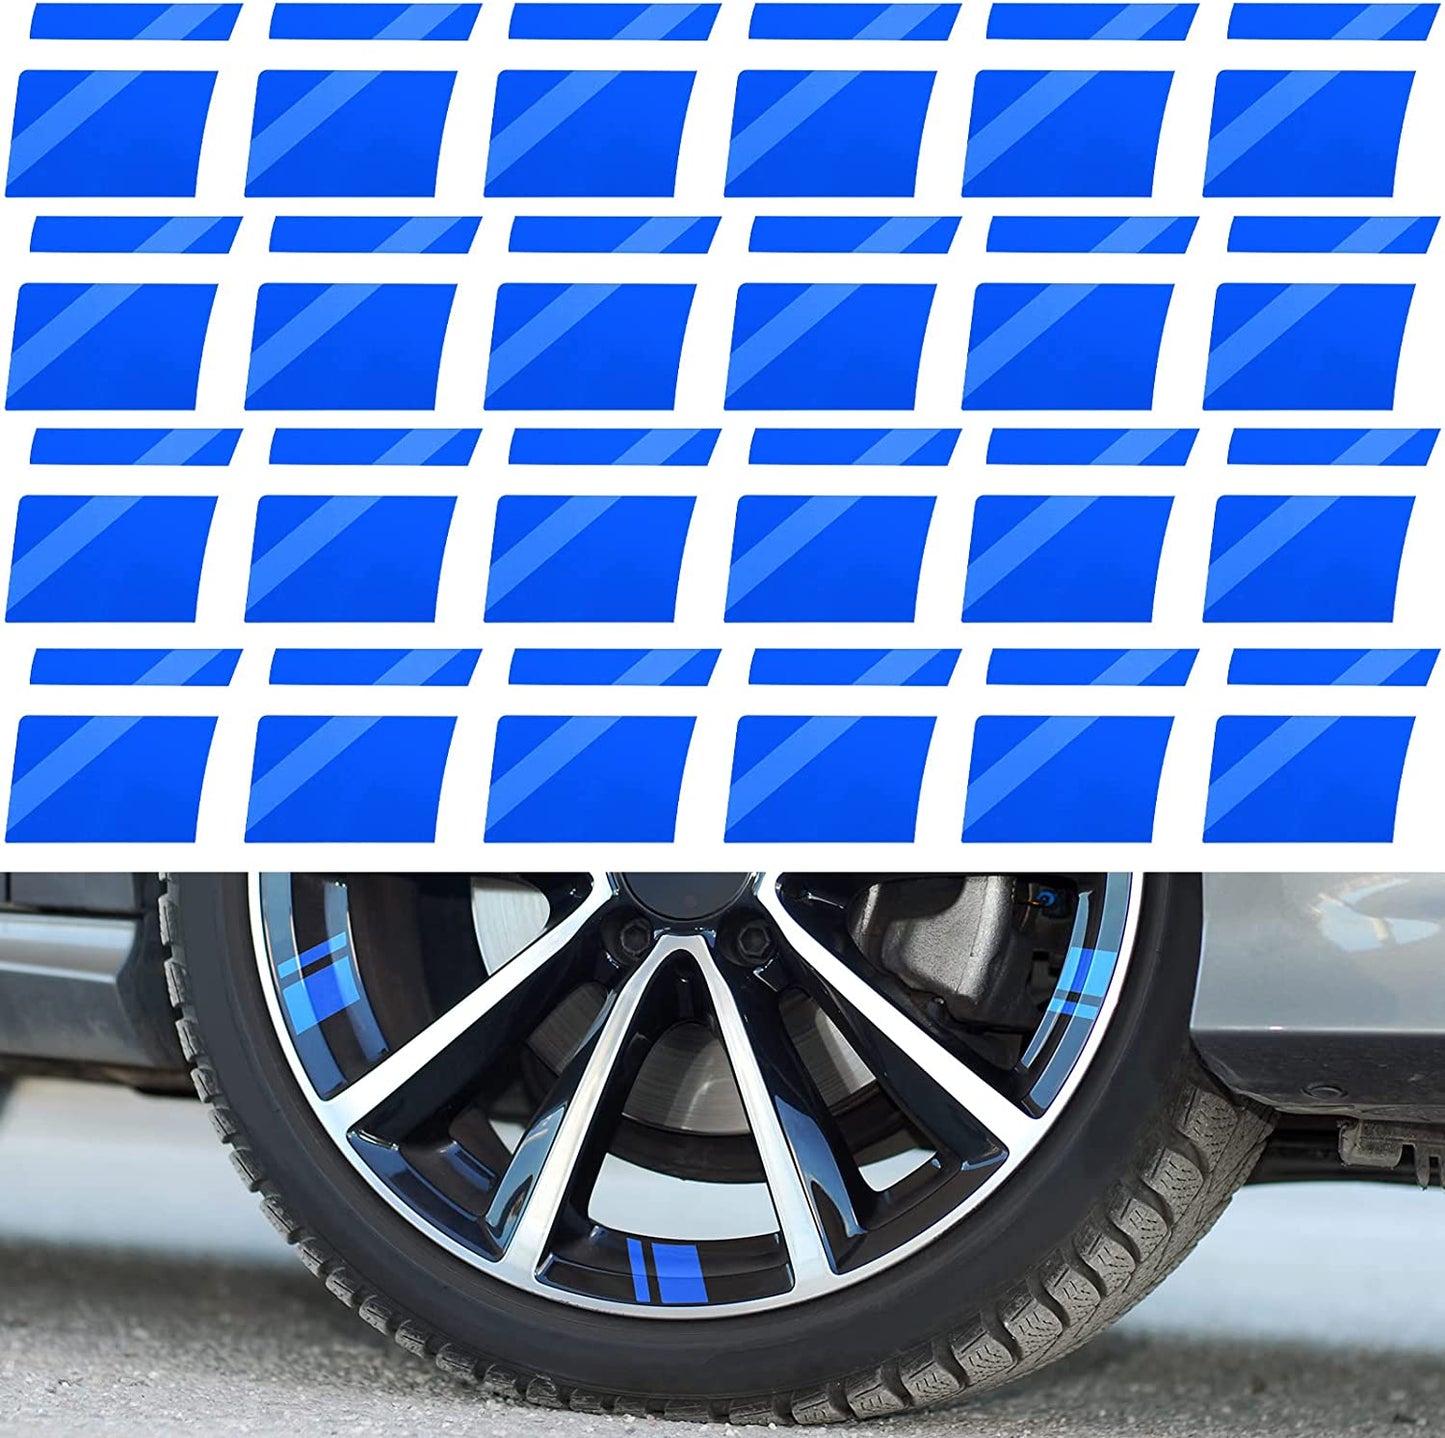 24 Pcs Wheel Rims Decal Stripes Reflective Car Stickers Wheel Hub Stickers Automotive Decals for 18-21 Inch Wheels Tire Rim Safety Automotive Exterior Accessories (Blue)